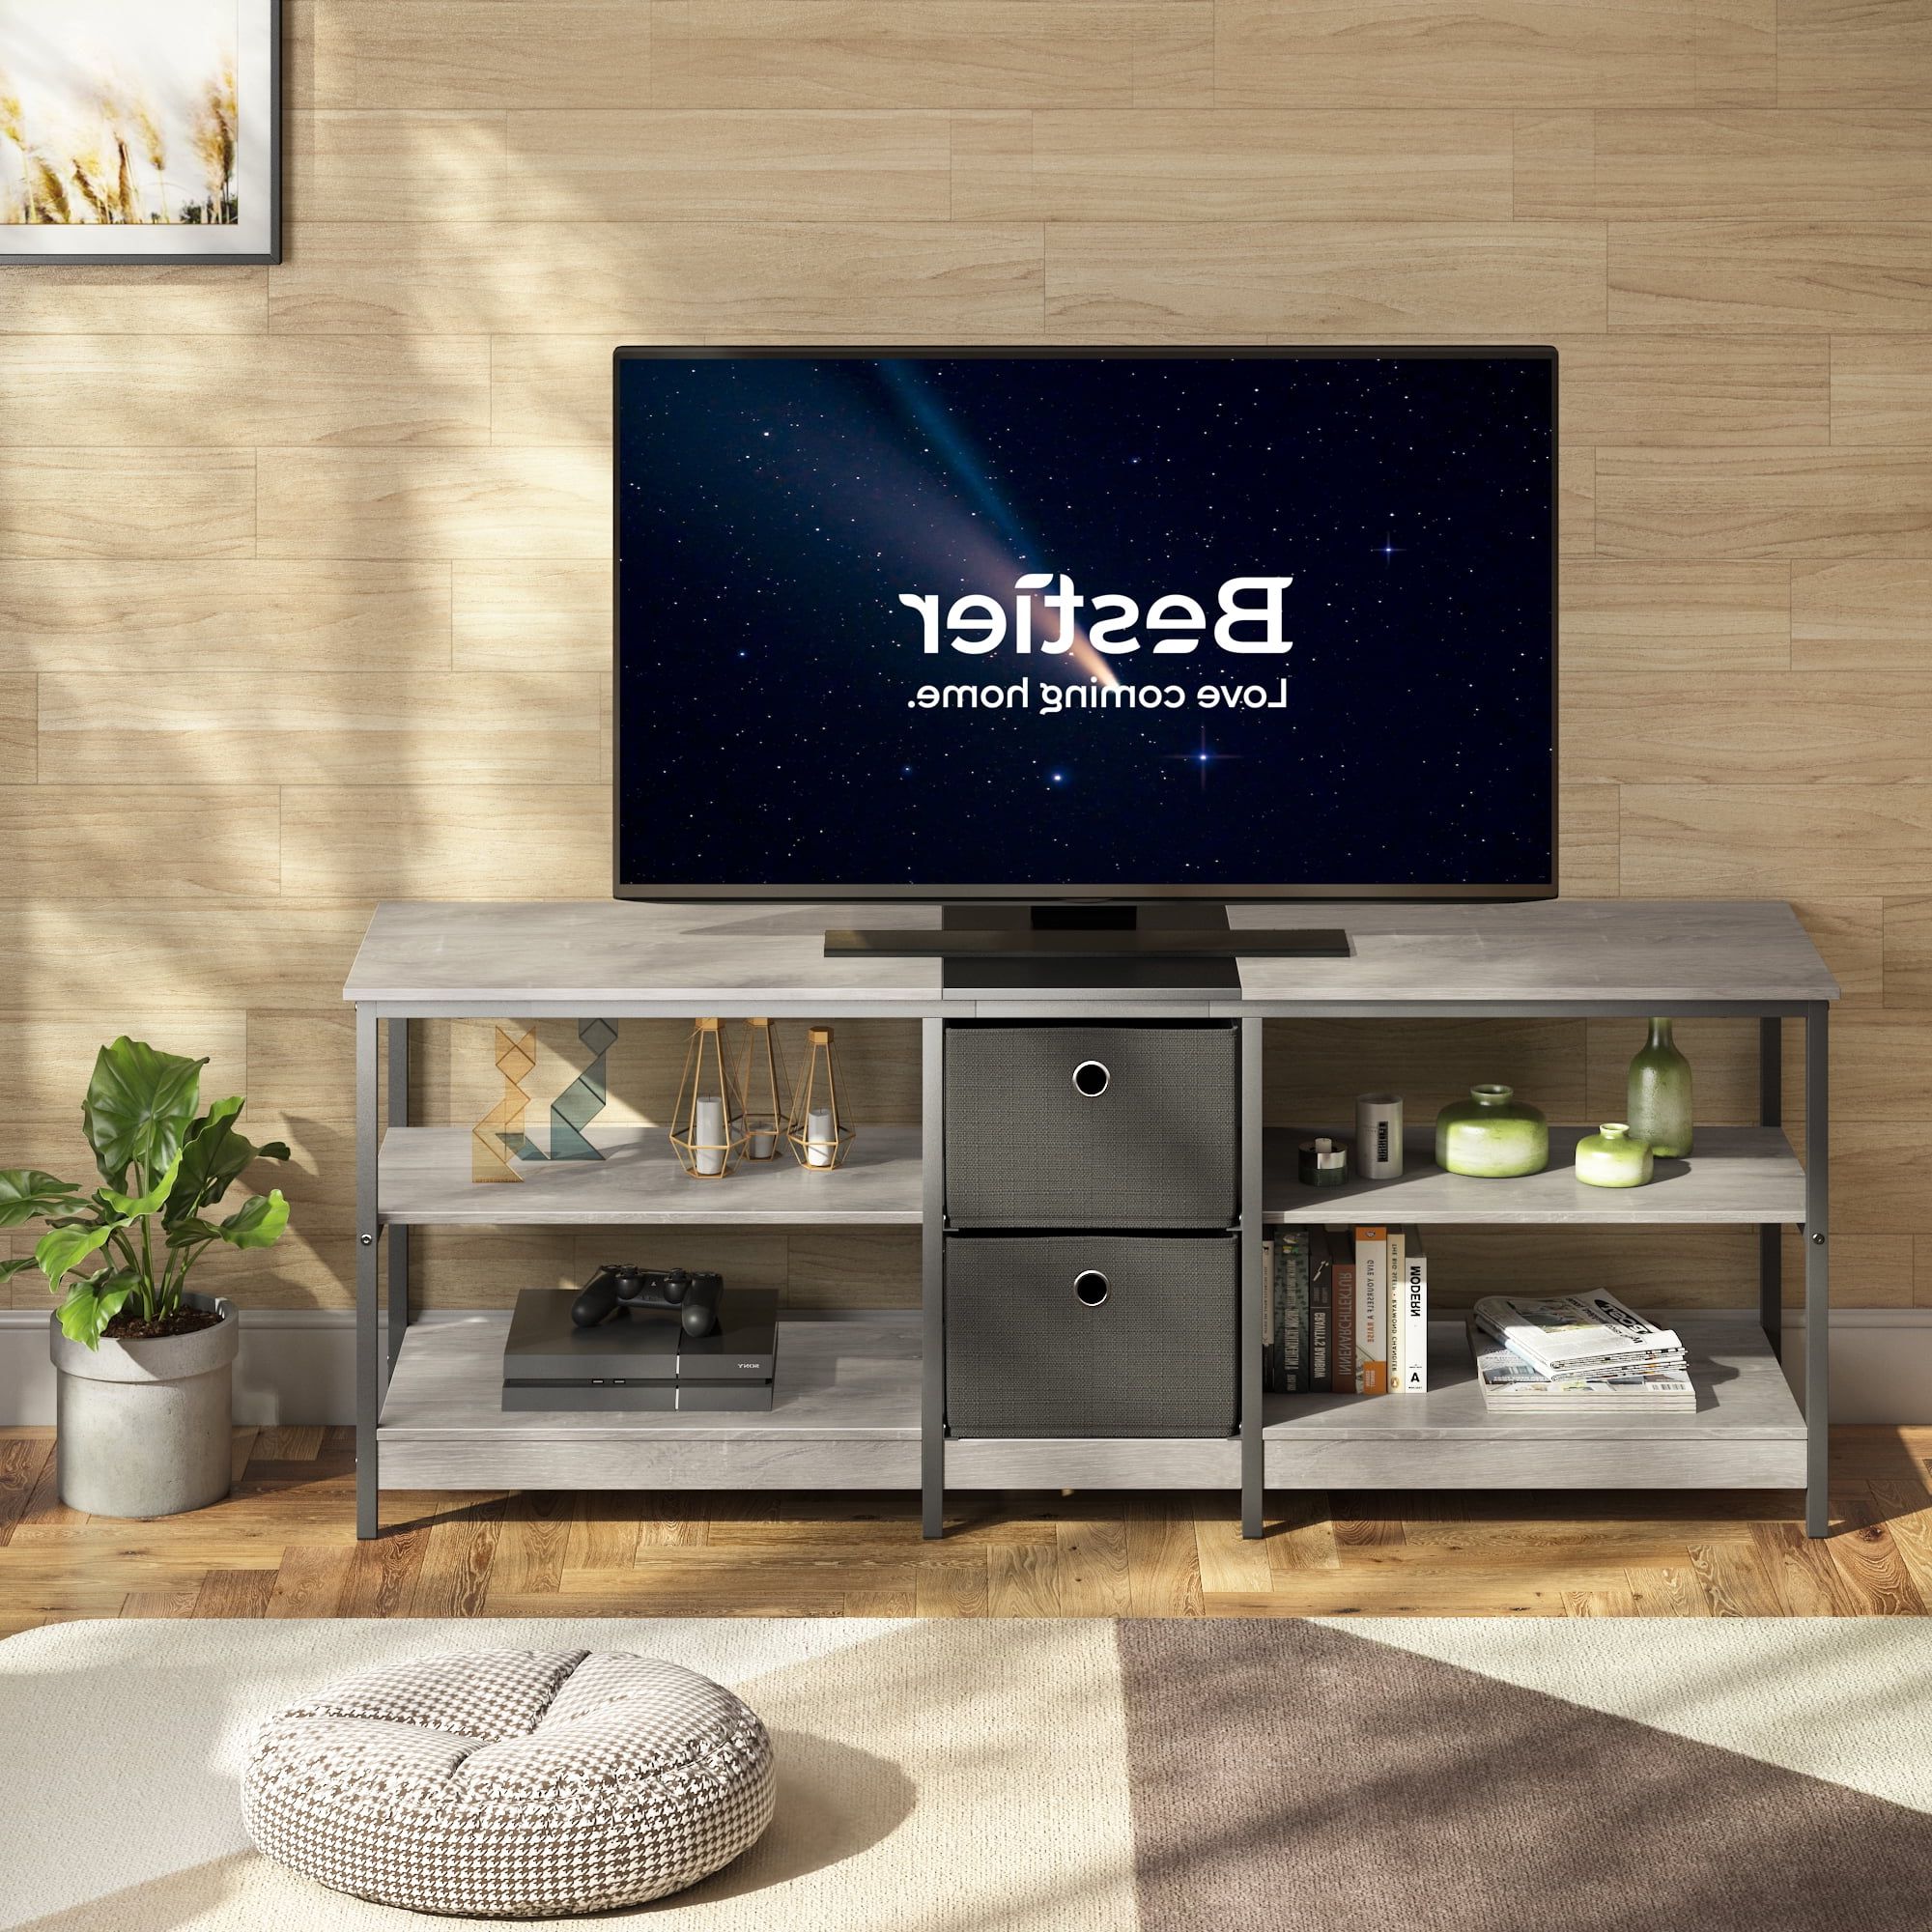 Bestier Farmhouse Entertainment Center Tv Stand With Shelves For Tvs Up With Regard To 2019 Bestier Tv Stand For Tvs Up To 75" (Photo 13 of 15)